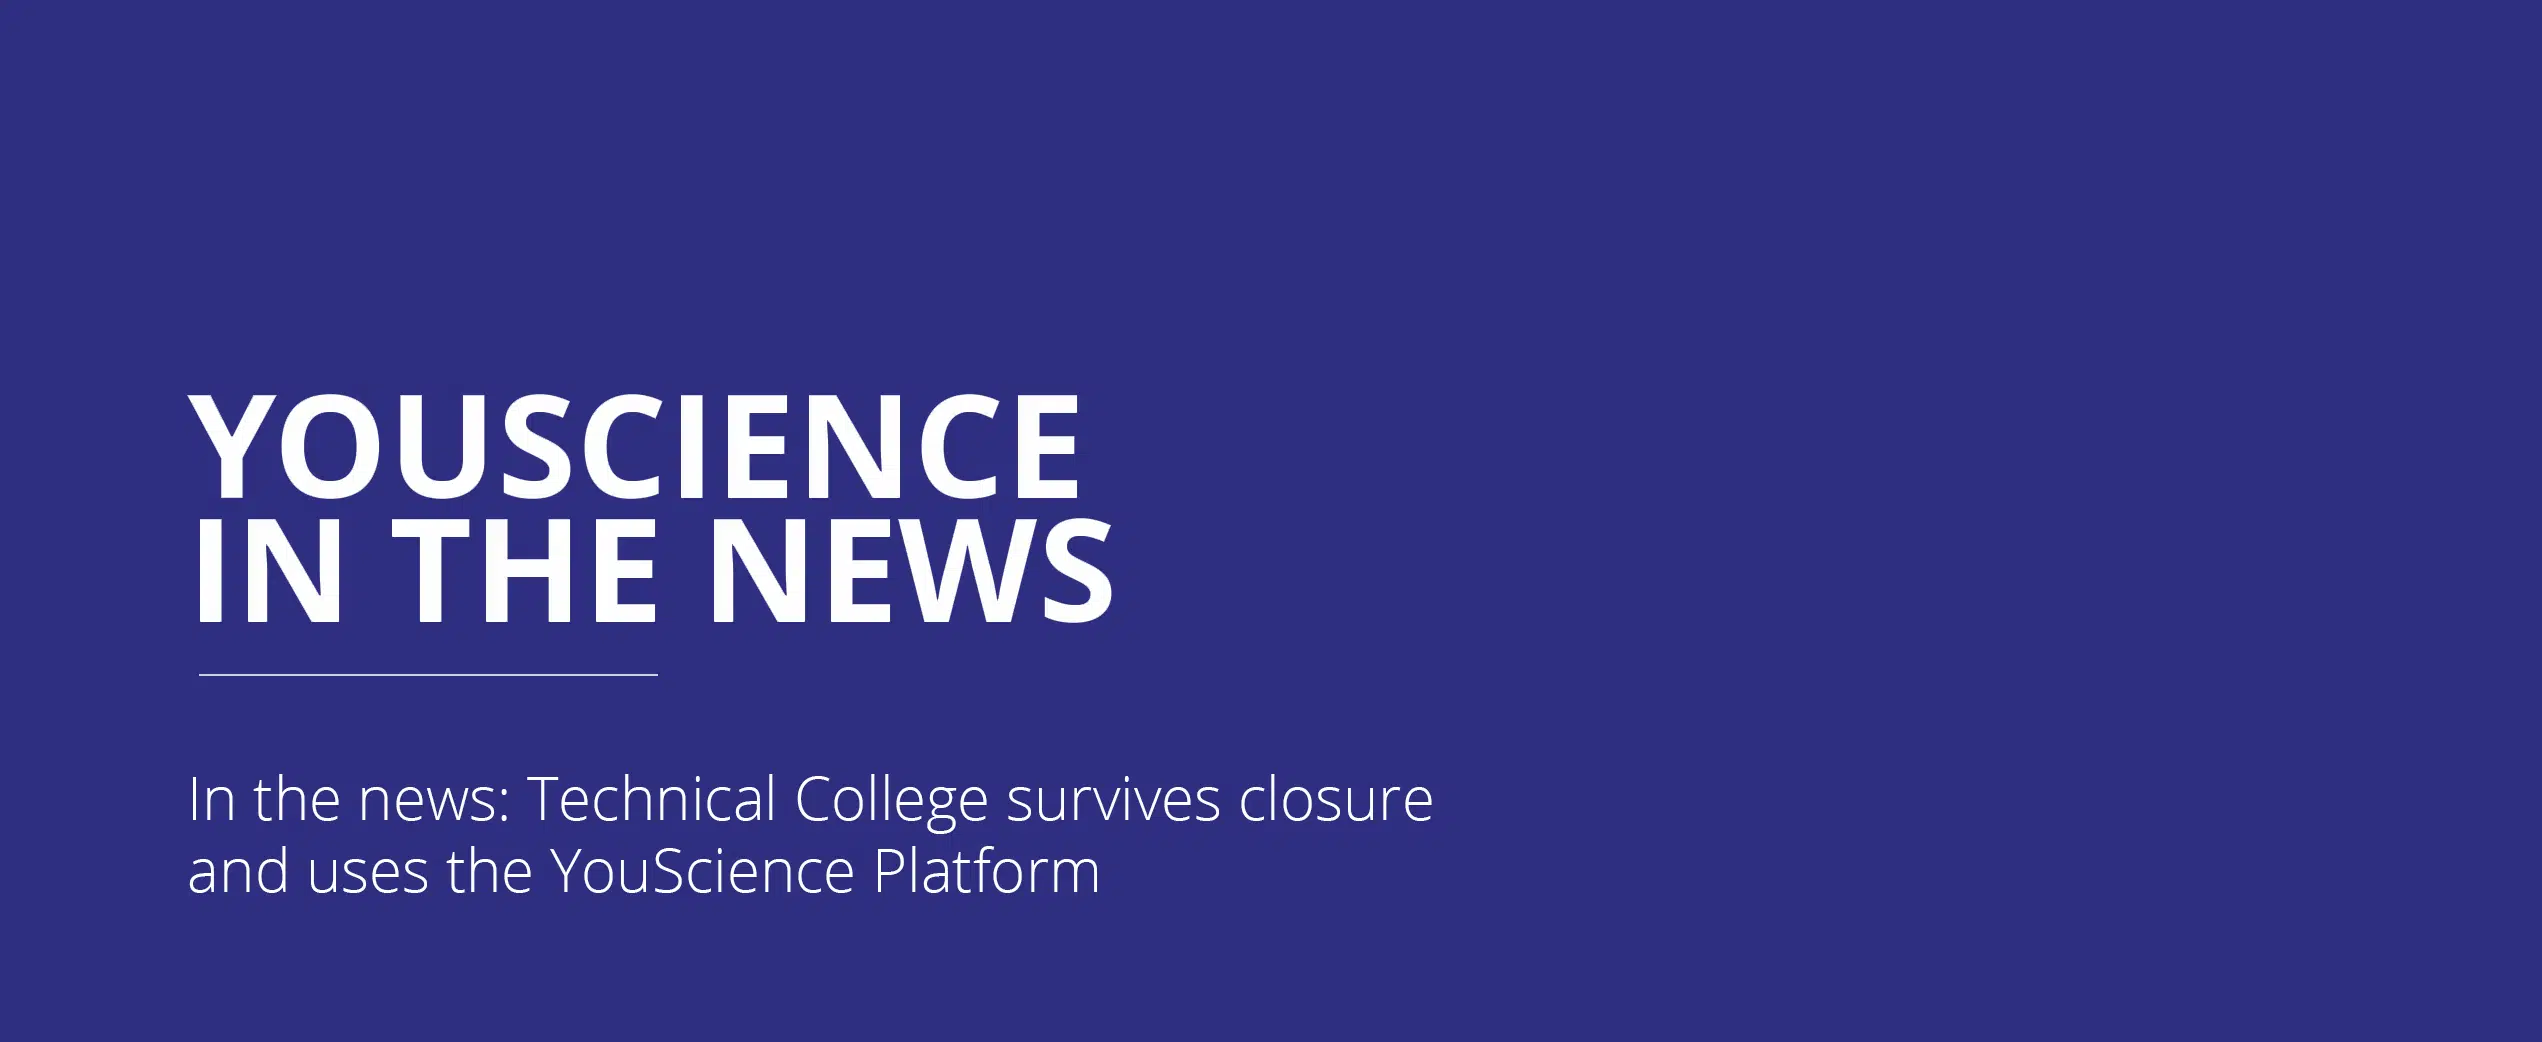 Technical College survives closure and uses the YouScience Platform